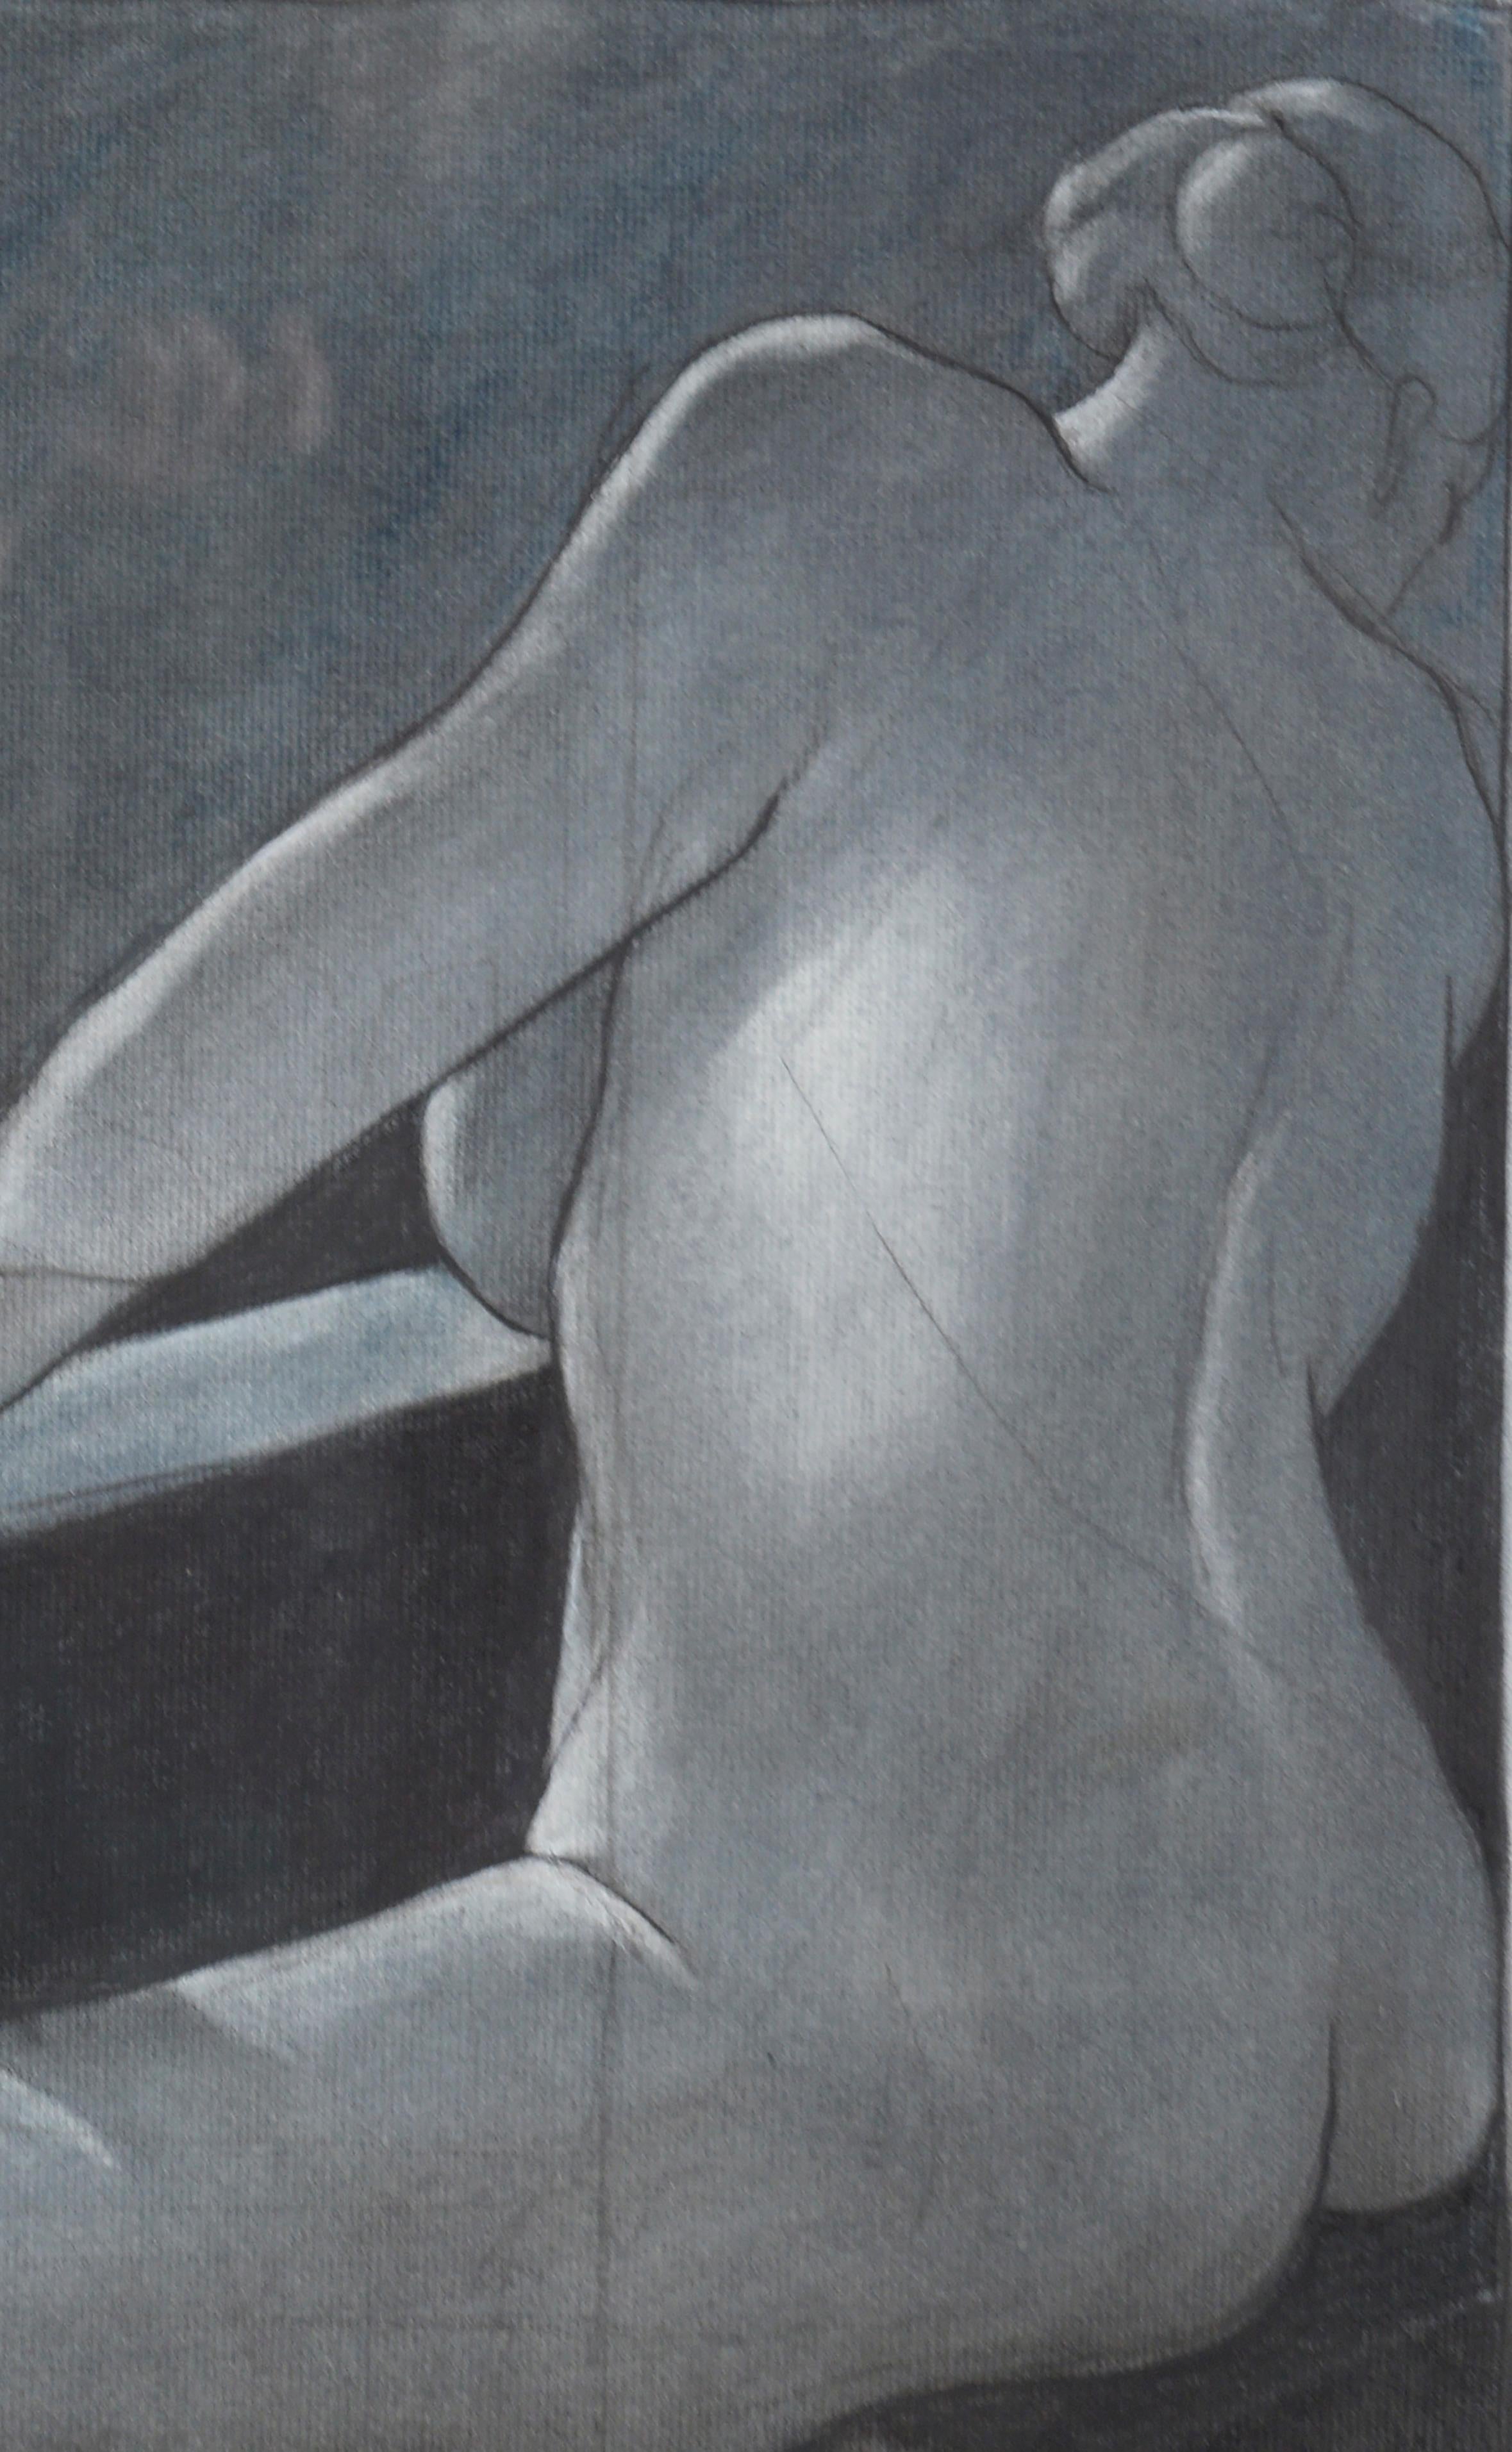 Striking nocturnal nude figurative fine art painting by California artist John Bowler (American, 20/21st Century), 2001. Signed and dated Bowler 2001 lower right corner (photo image enhanced). Presented in pewter-toned wood frame under glass. Image